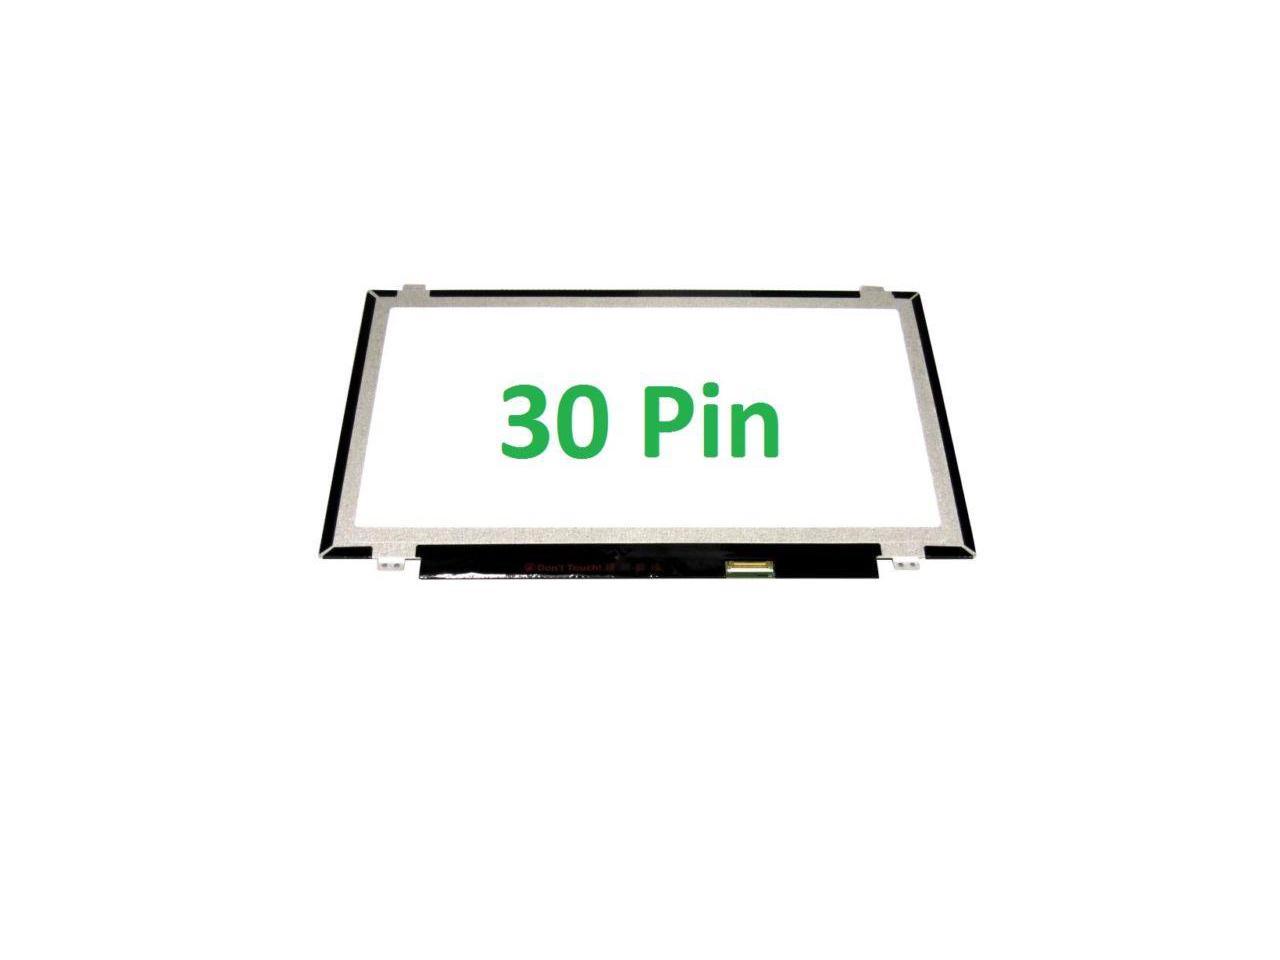 B2 TP Wikiparts 14.0 1366x768 LED Screen for DELL 5T0P9 LCD LAPTOP 05T0P9 LP140WHU